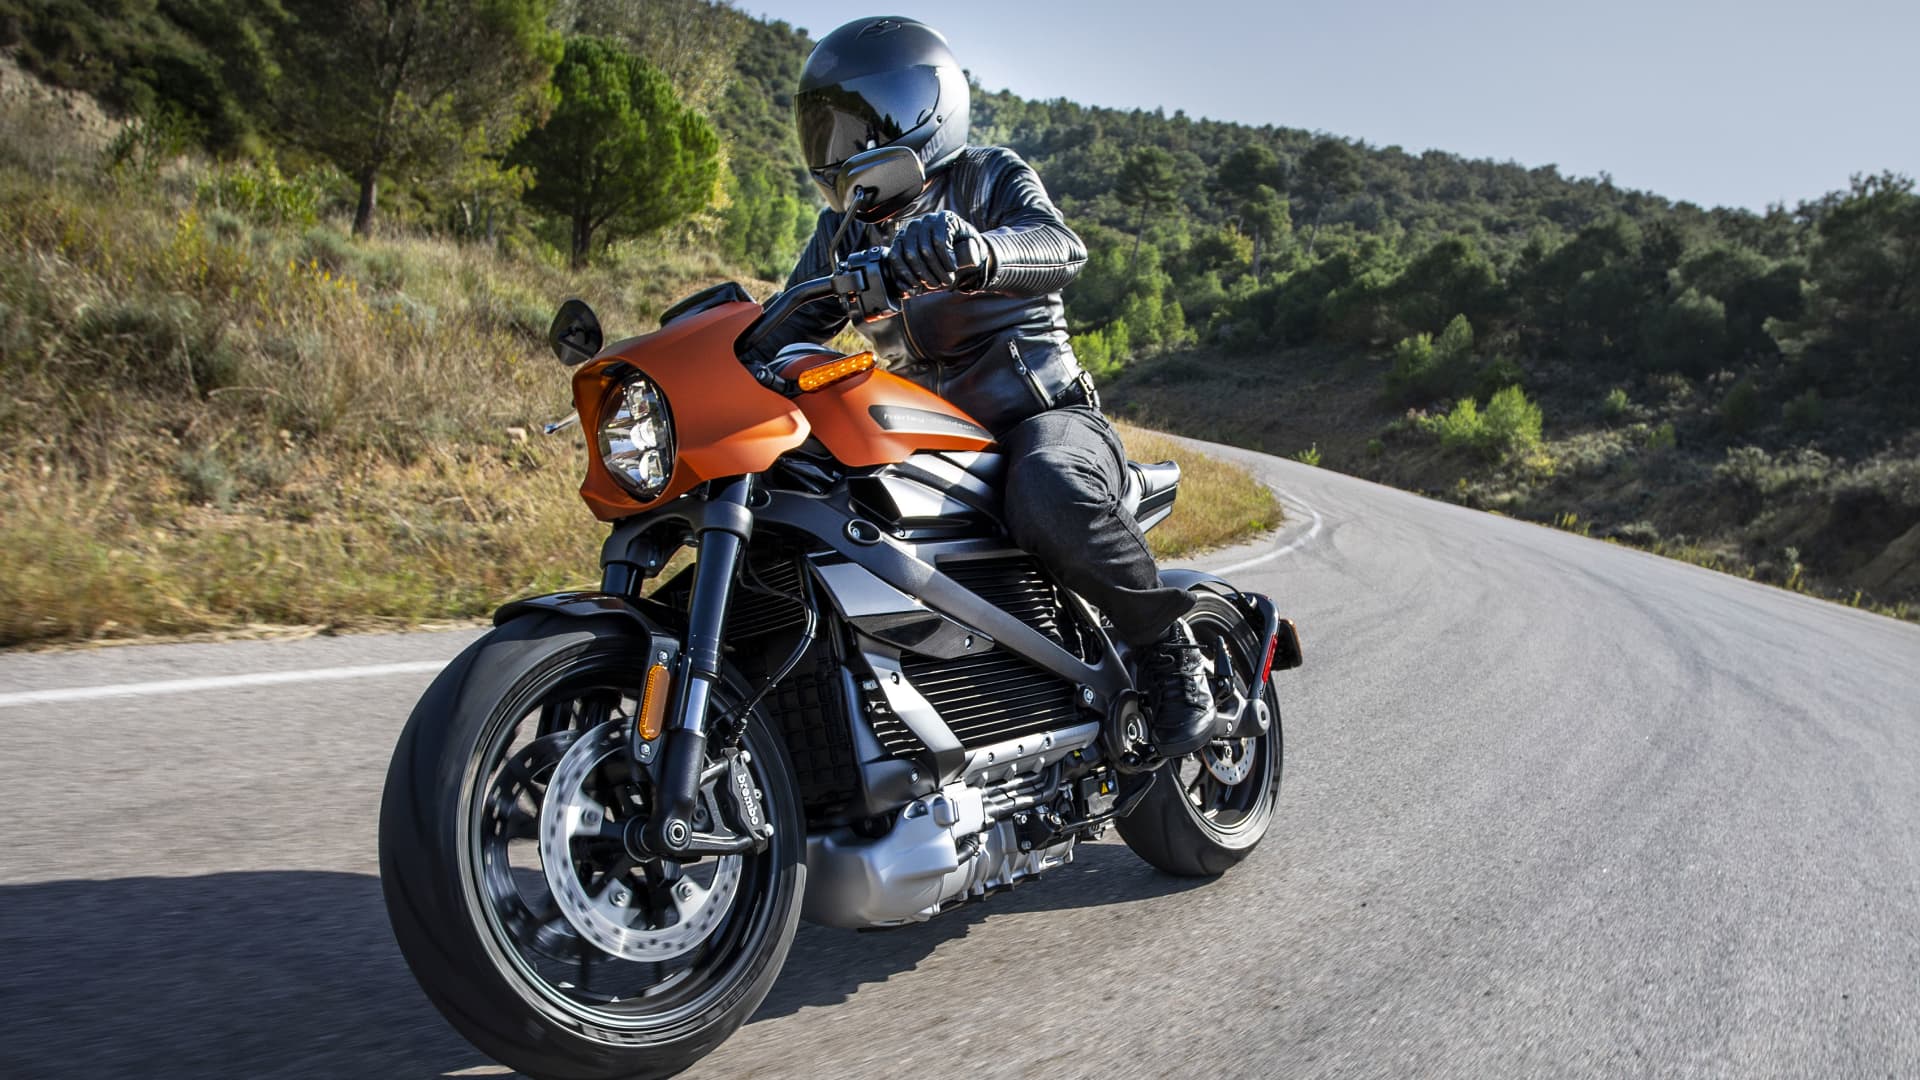 Harley-Davidson's electric motorcycle signals a big change for the legendary, but troubled, company